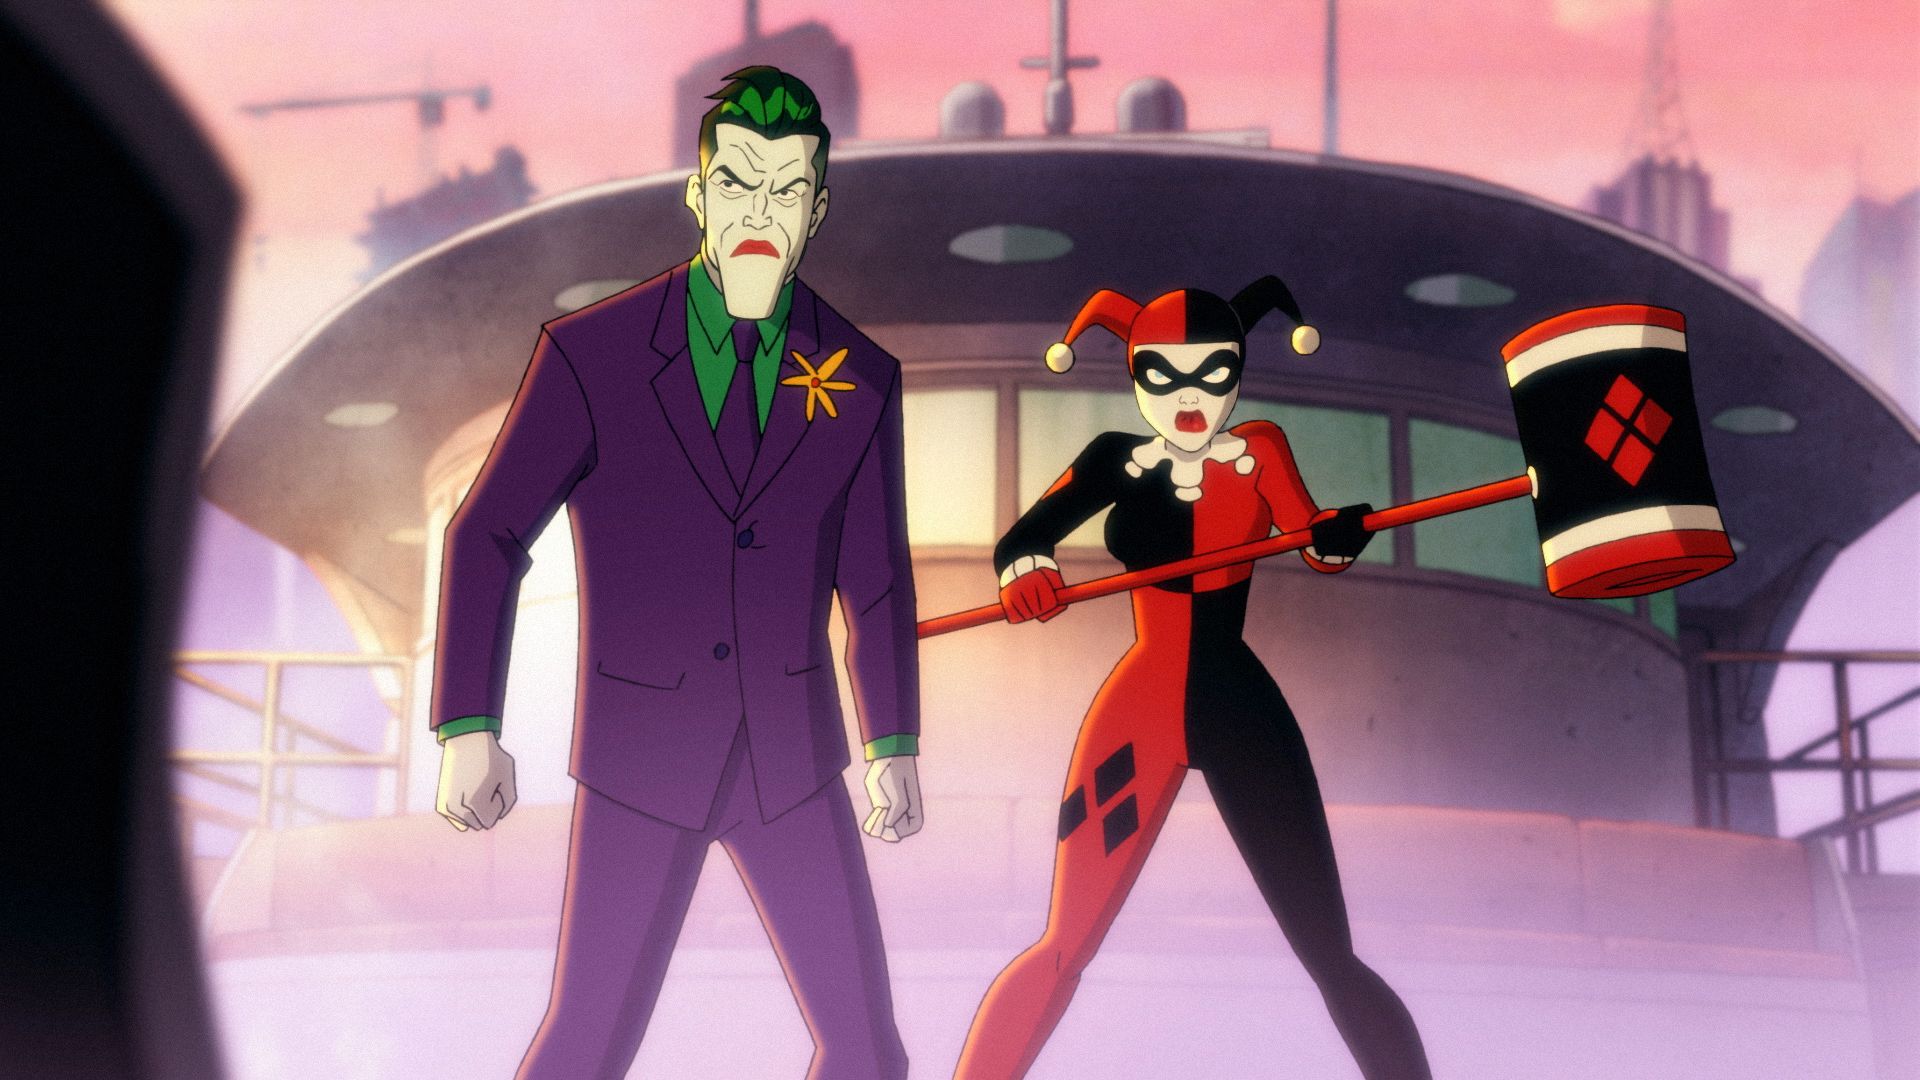 Harley Quinn' gets an animated workout between 'Joker' and 'Birds of Prey